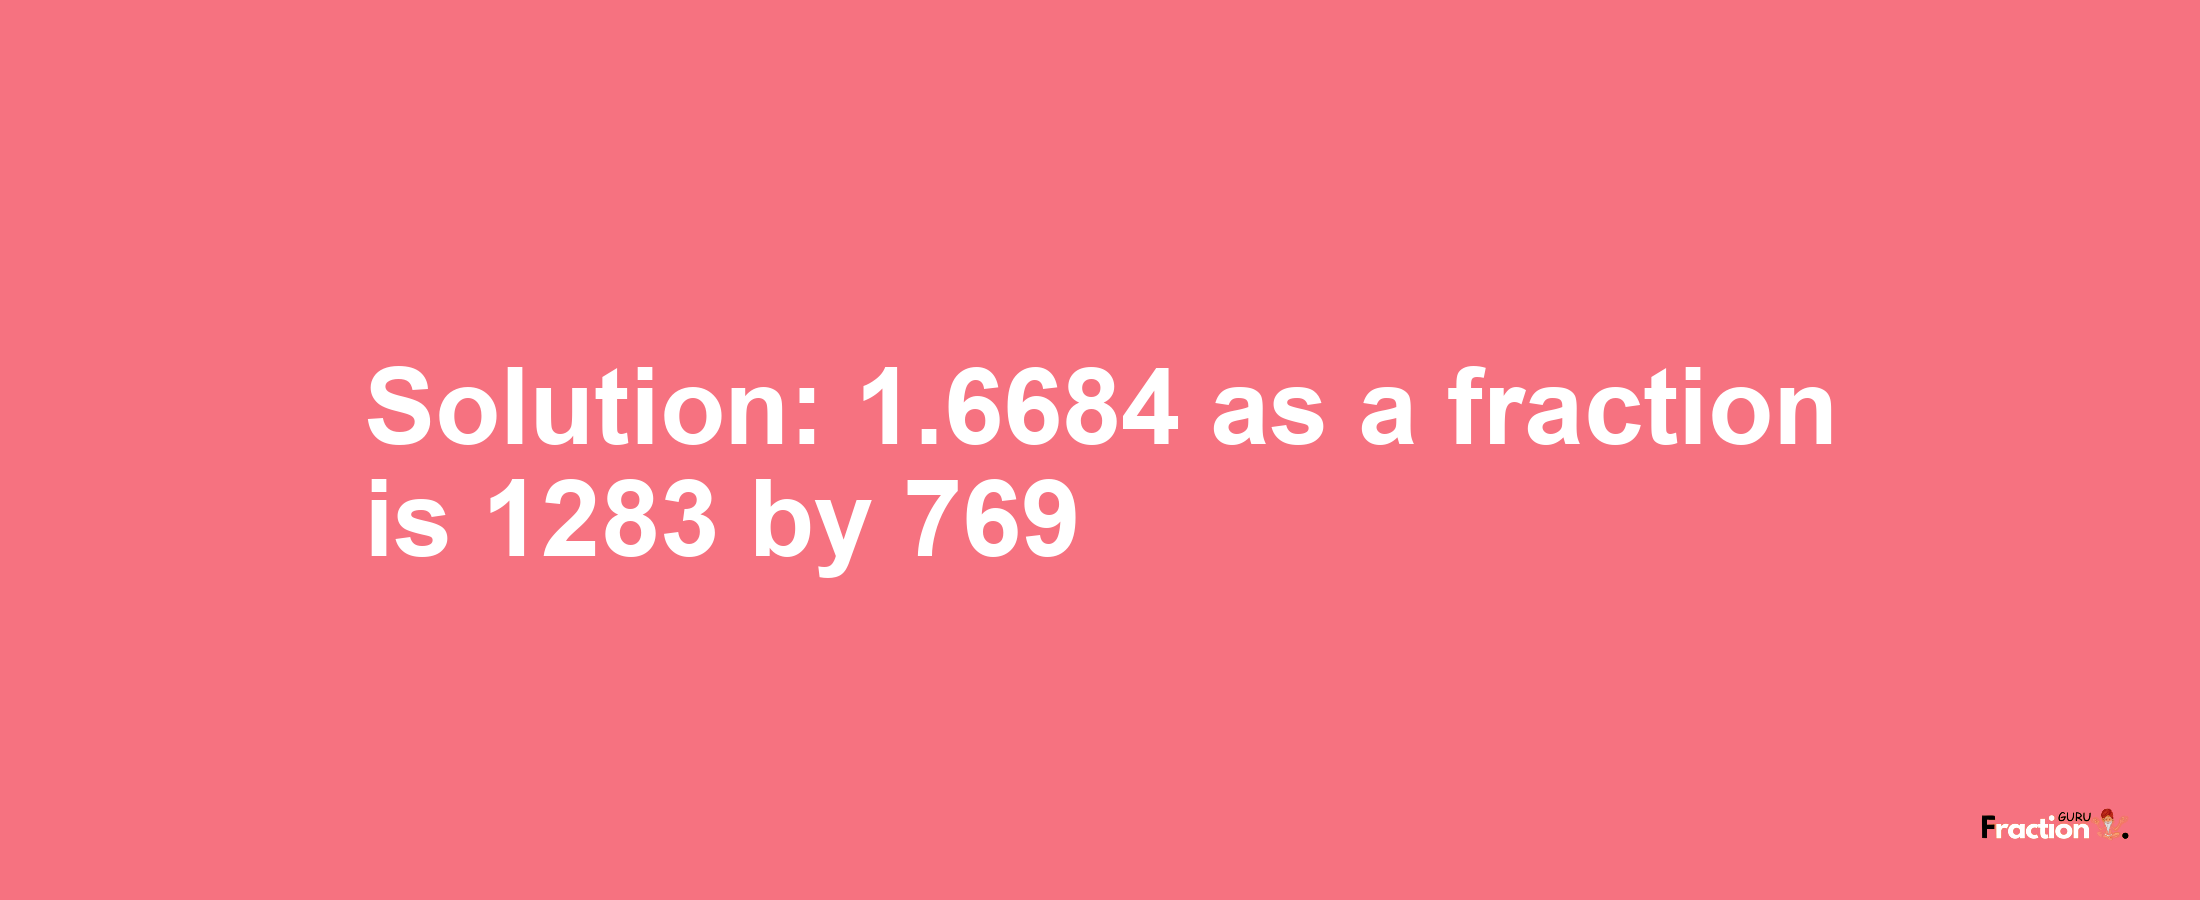 Solution:1.6684 as a fraction is 1283/769